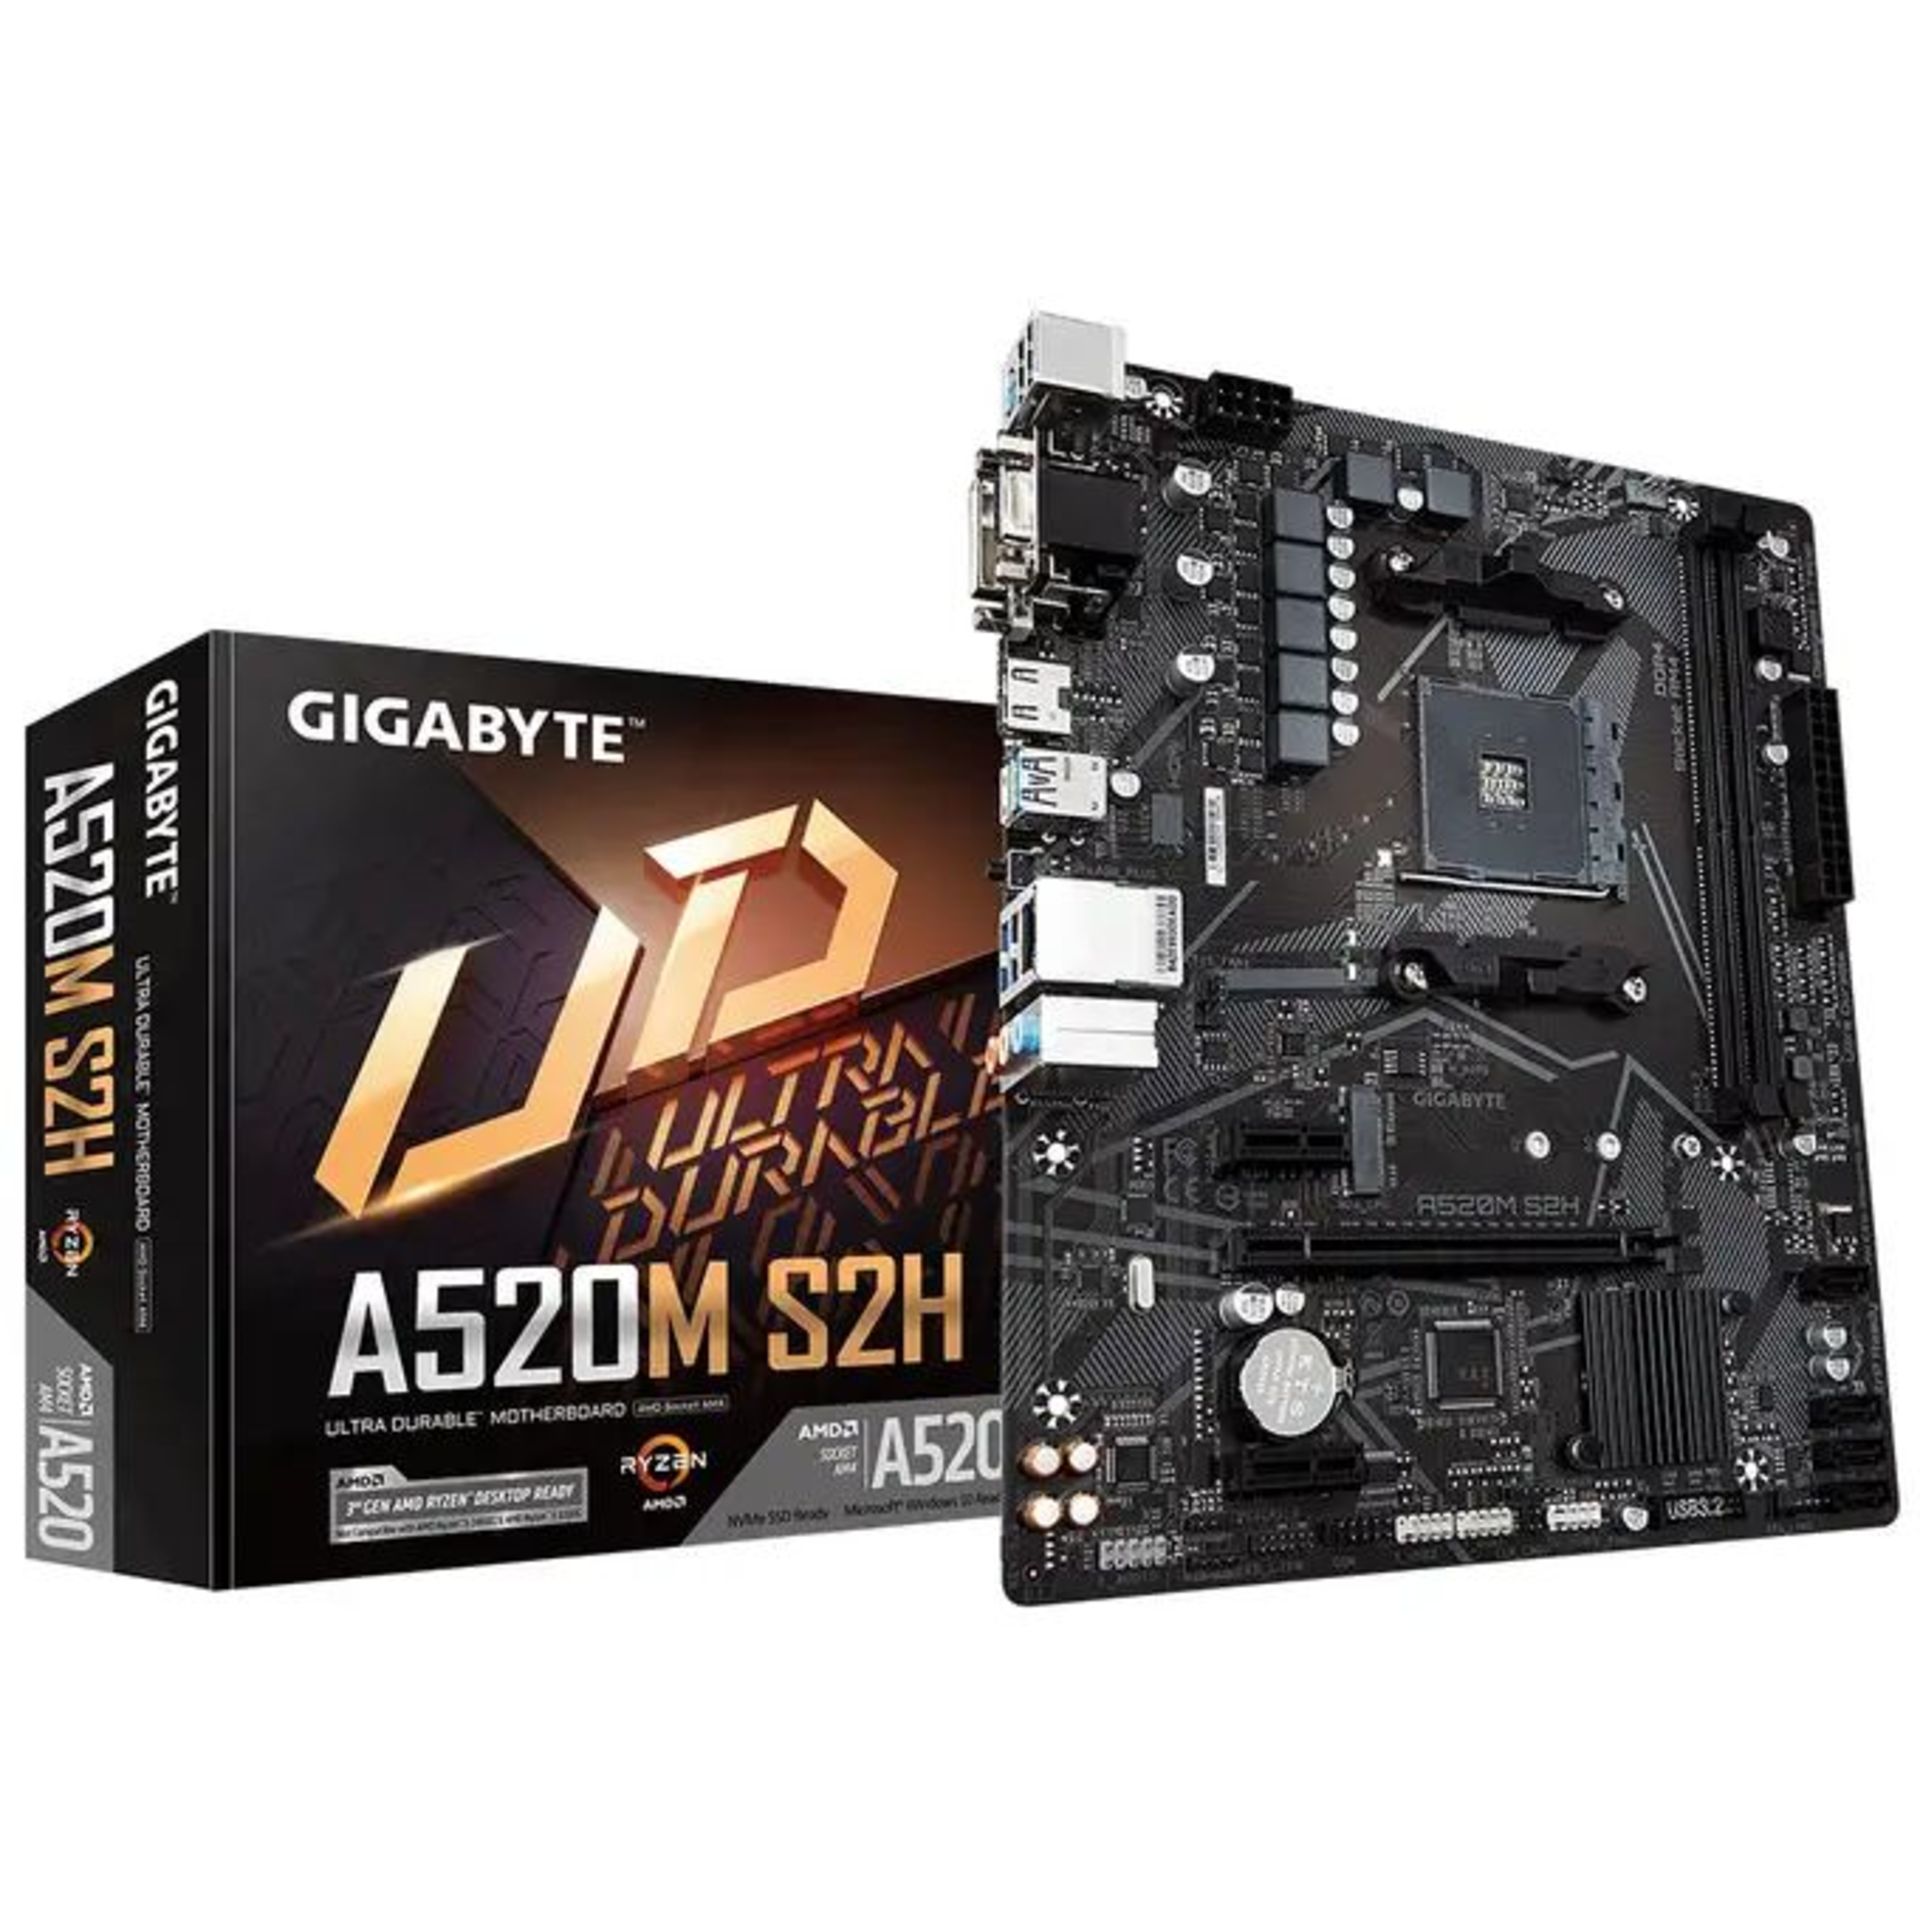 Gigabyte A520M S2H AMD A520 Micro ATX Motherboard - Socket AM4. - P1. GIGABYTE UD series